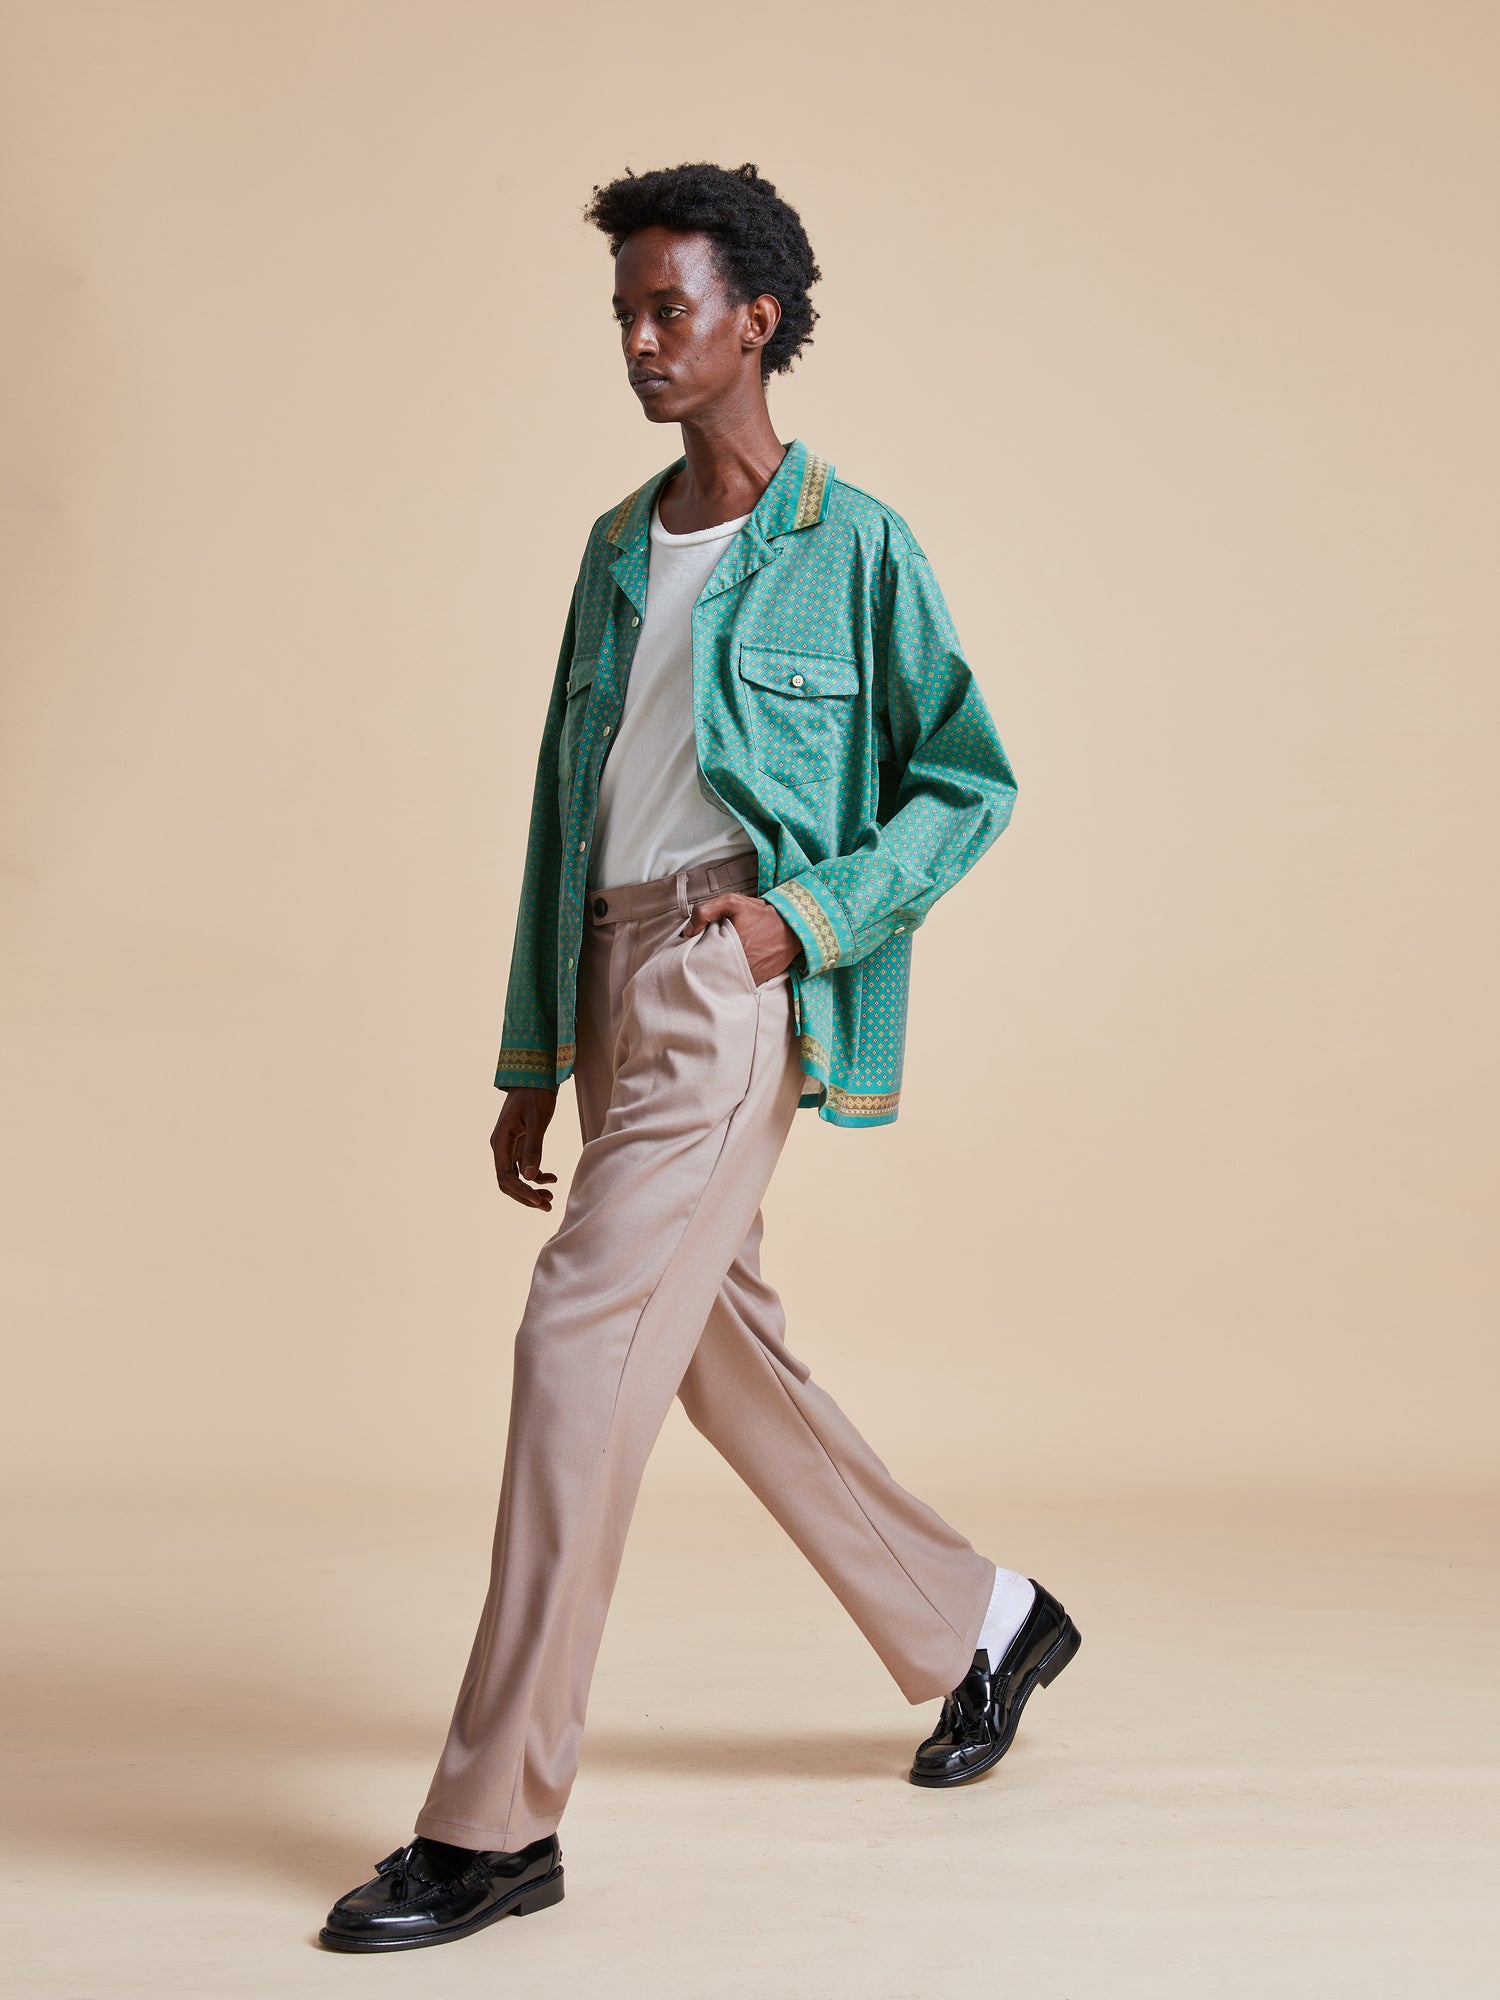 A woman in a green jacket walking on a beige background, showcasing the Found Arbor Long Sleeve Camp Shirt.